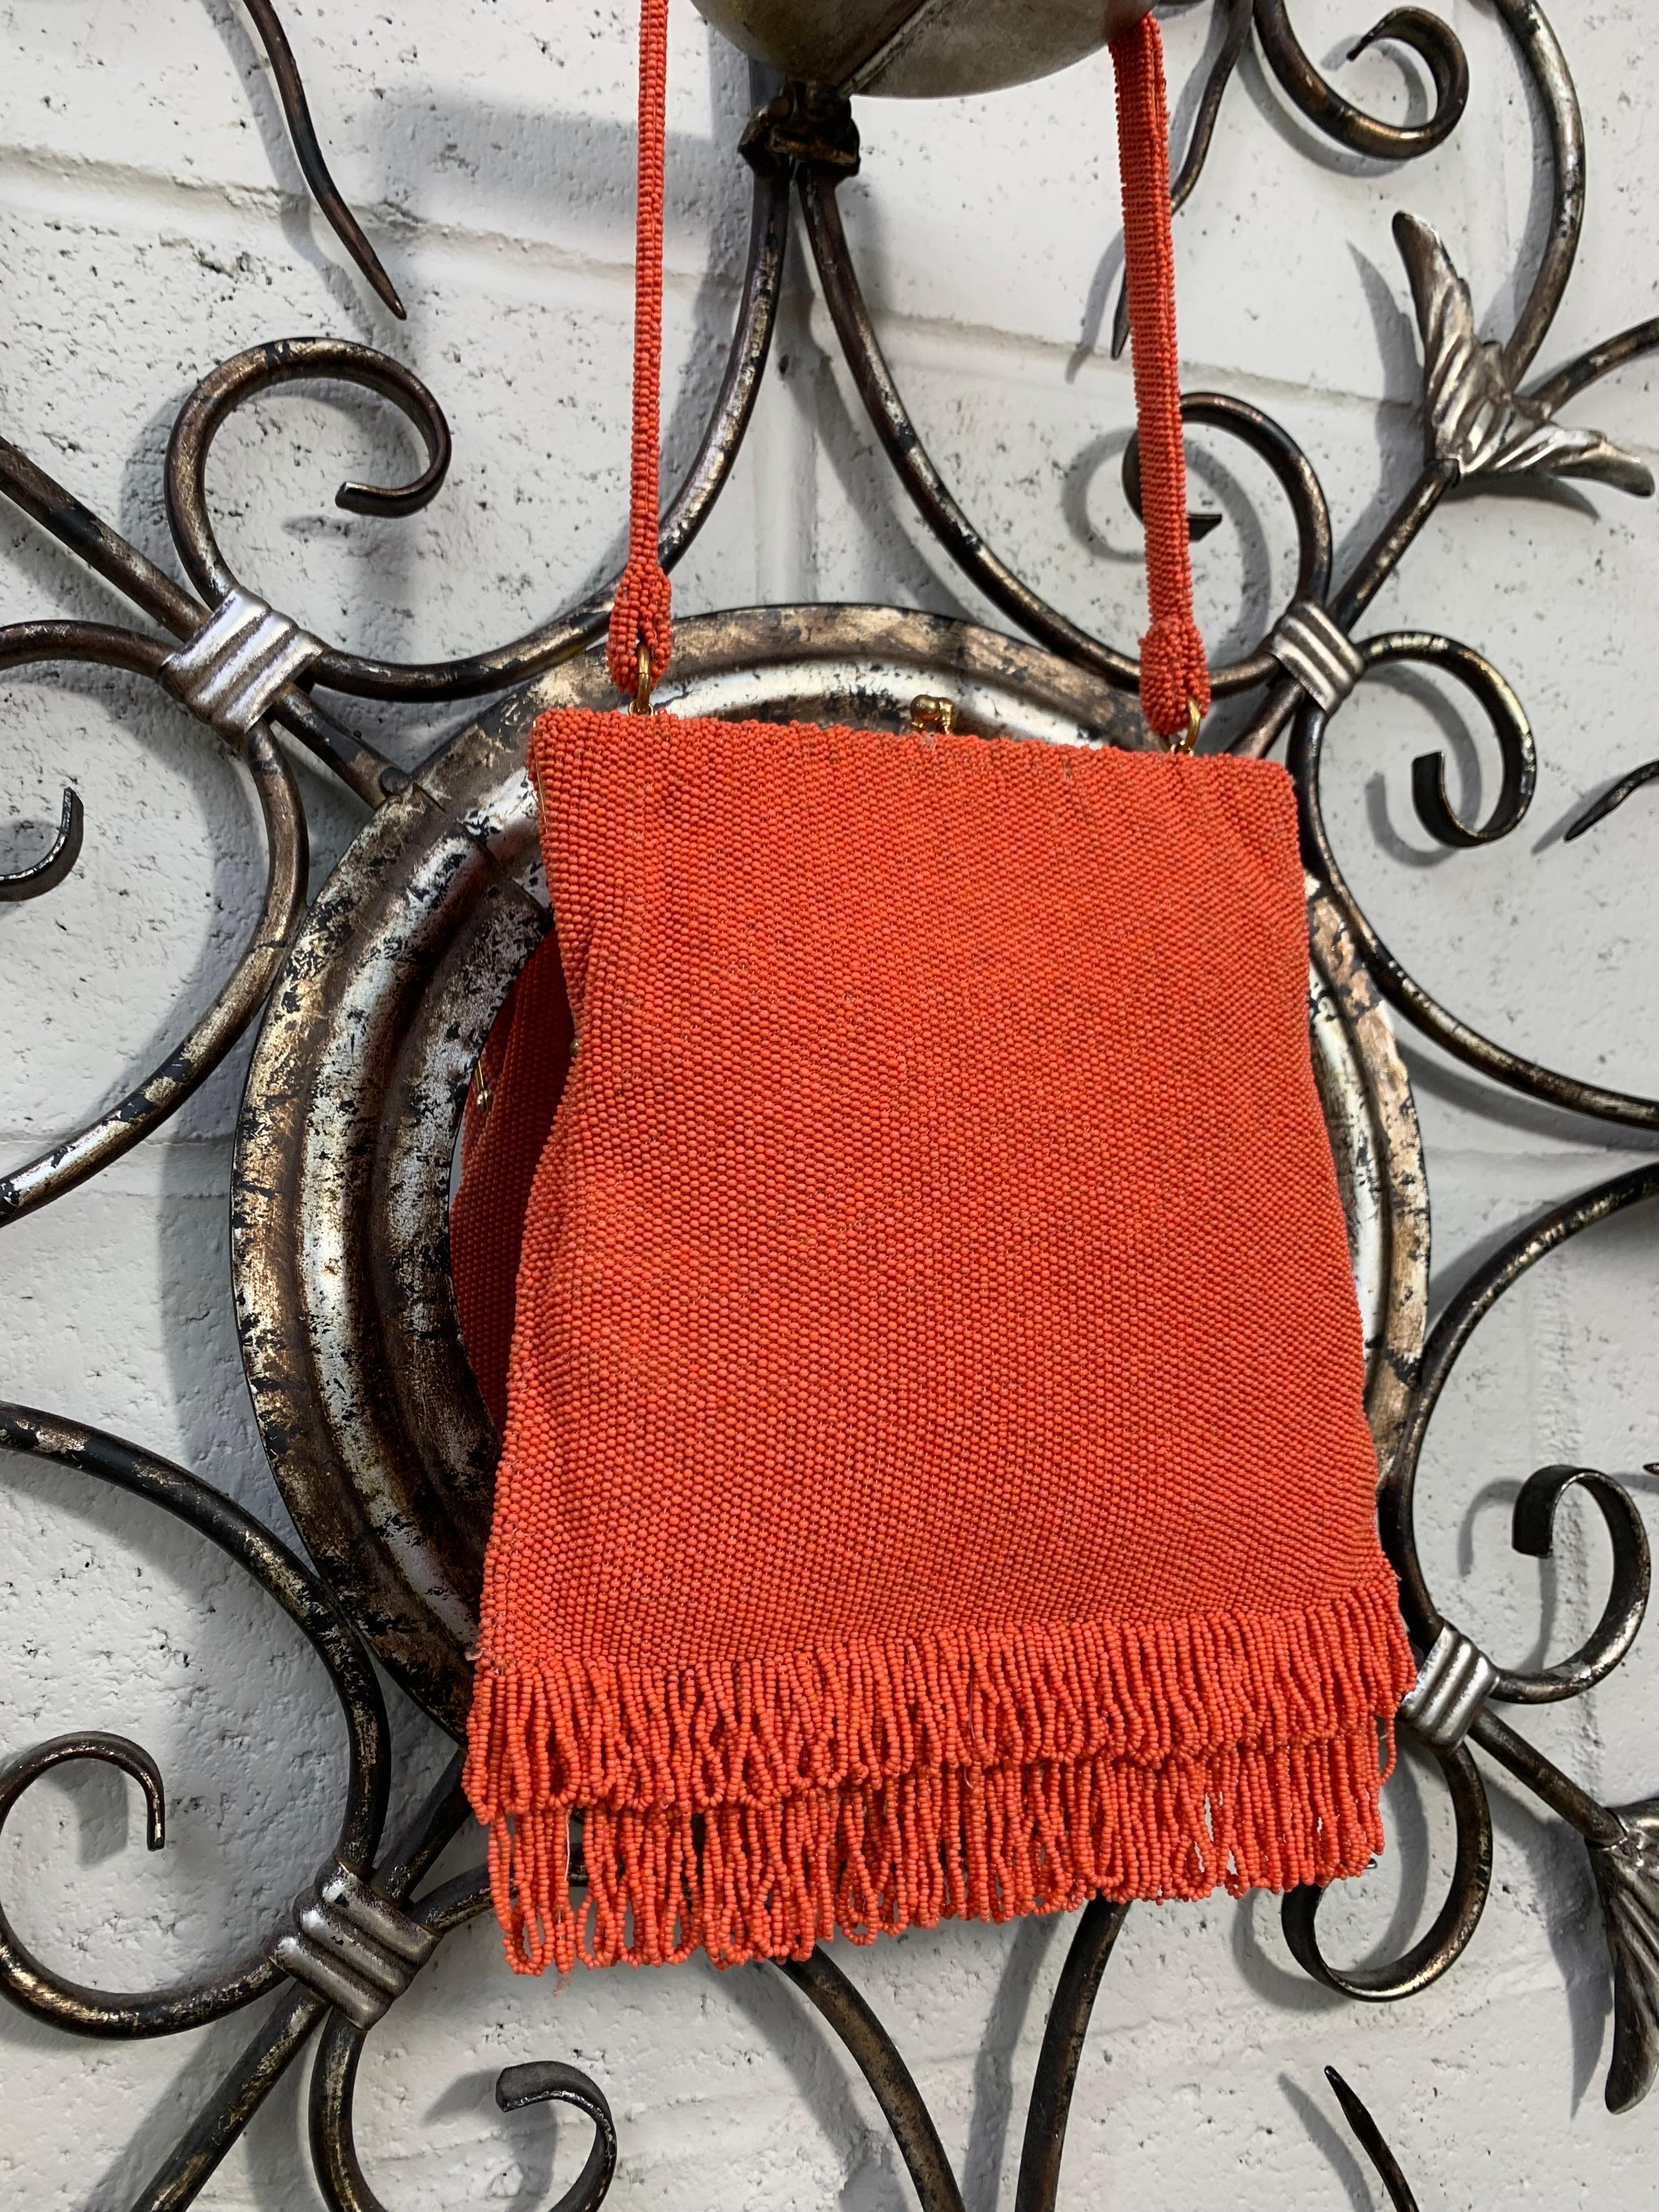 1950s Koret coral color seed beaded handbag with beaded handle, seed bead looped fringe bottom and cobalt blue silk satin lining. Excellent condition. Medium sized, will accommodate a large cell phone. 